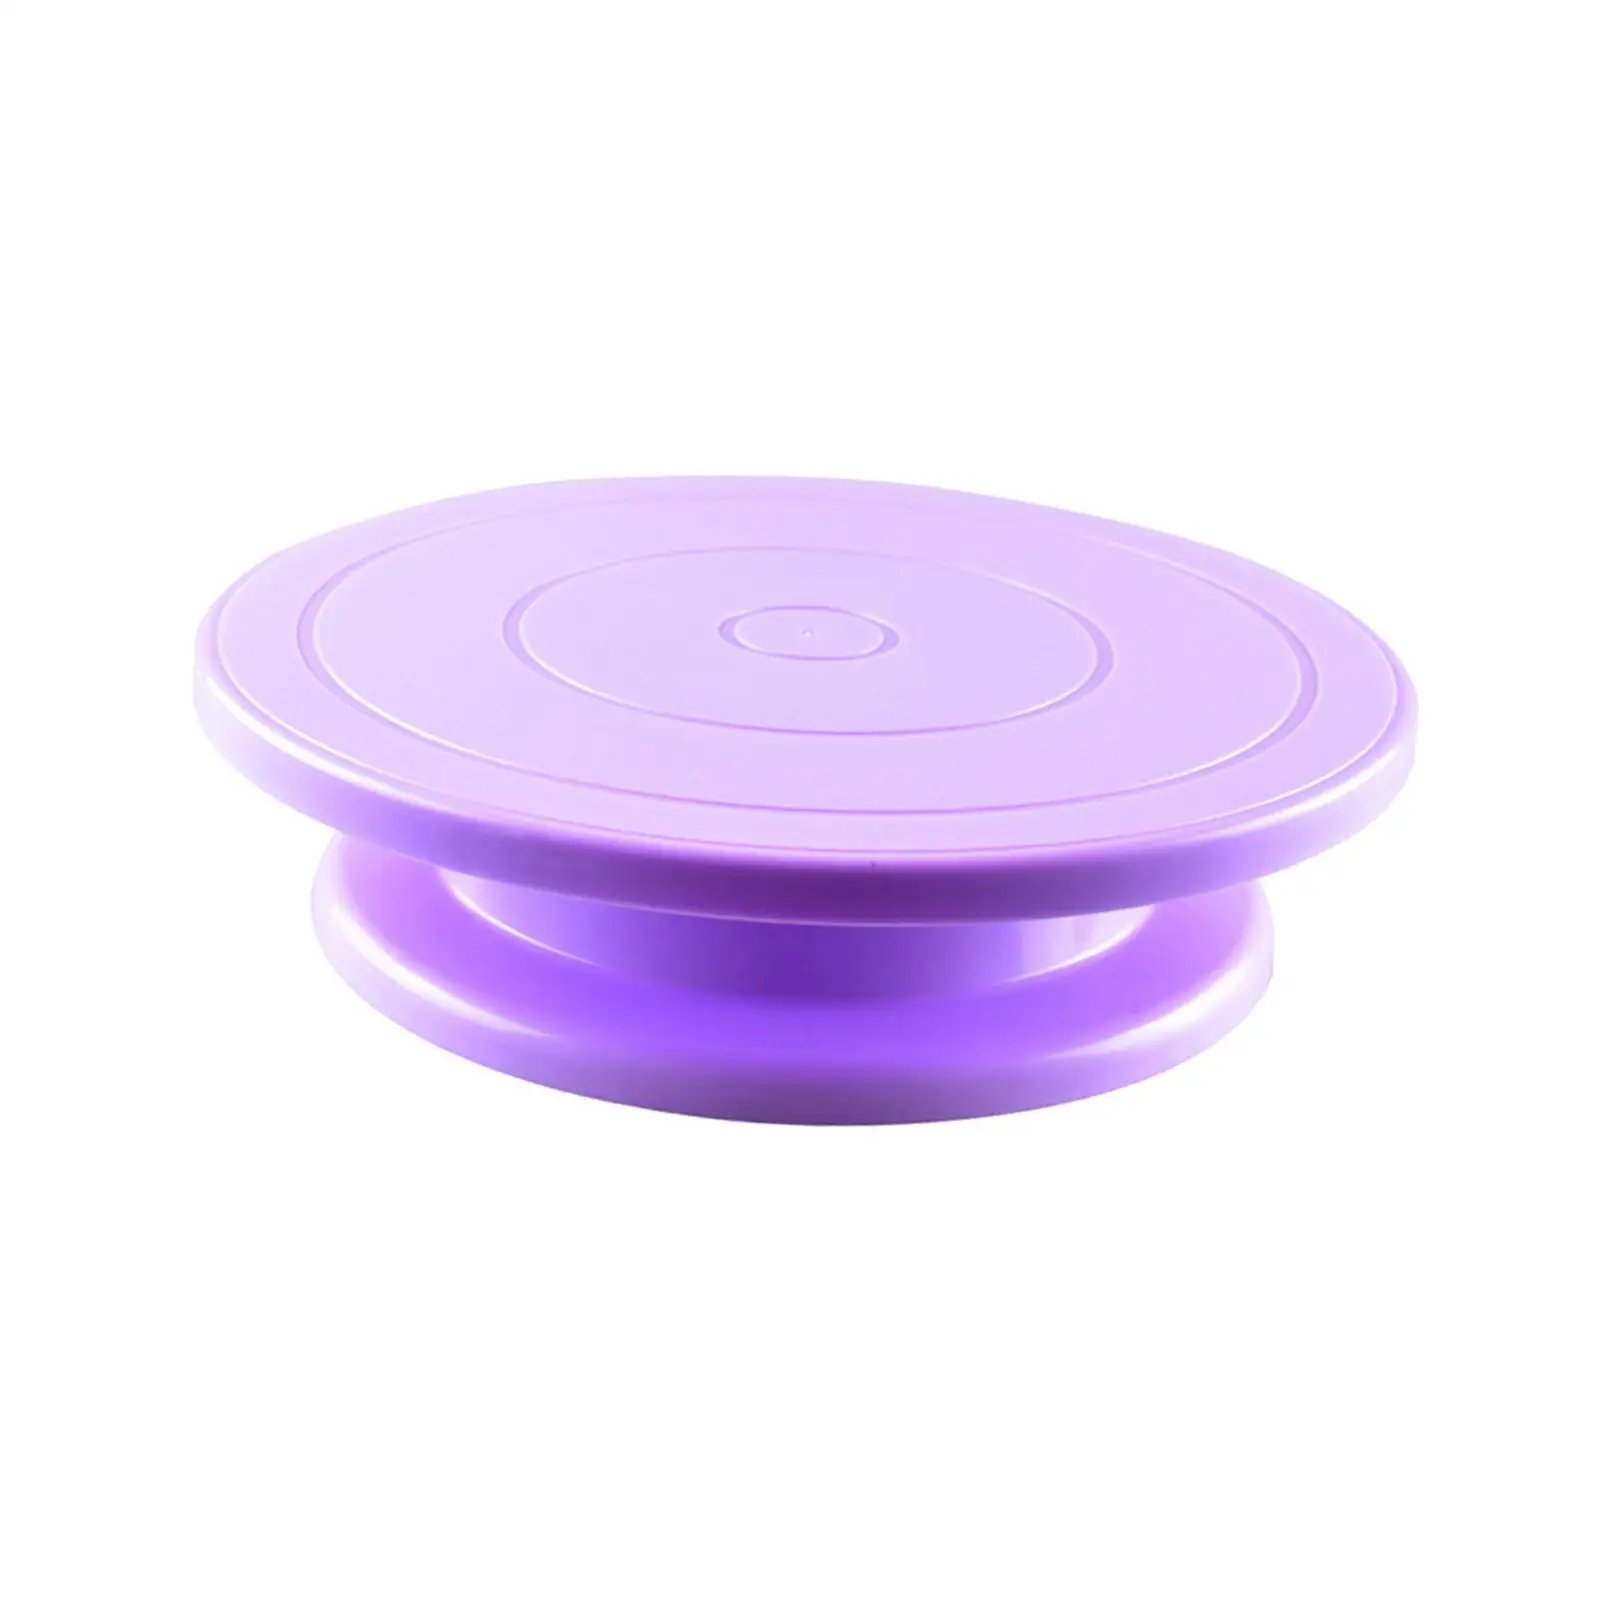 Rotating Cake Stand Turn Table Stand Non Slip Cake Decorating Turntable